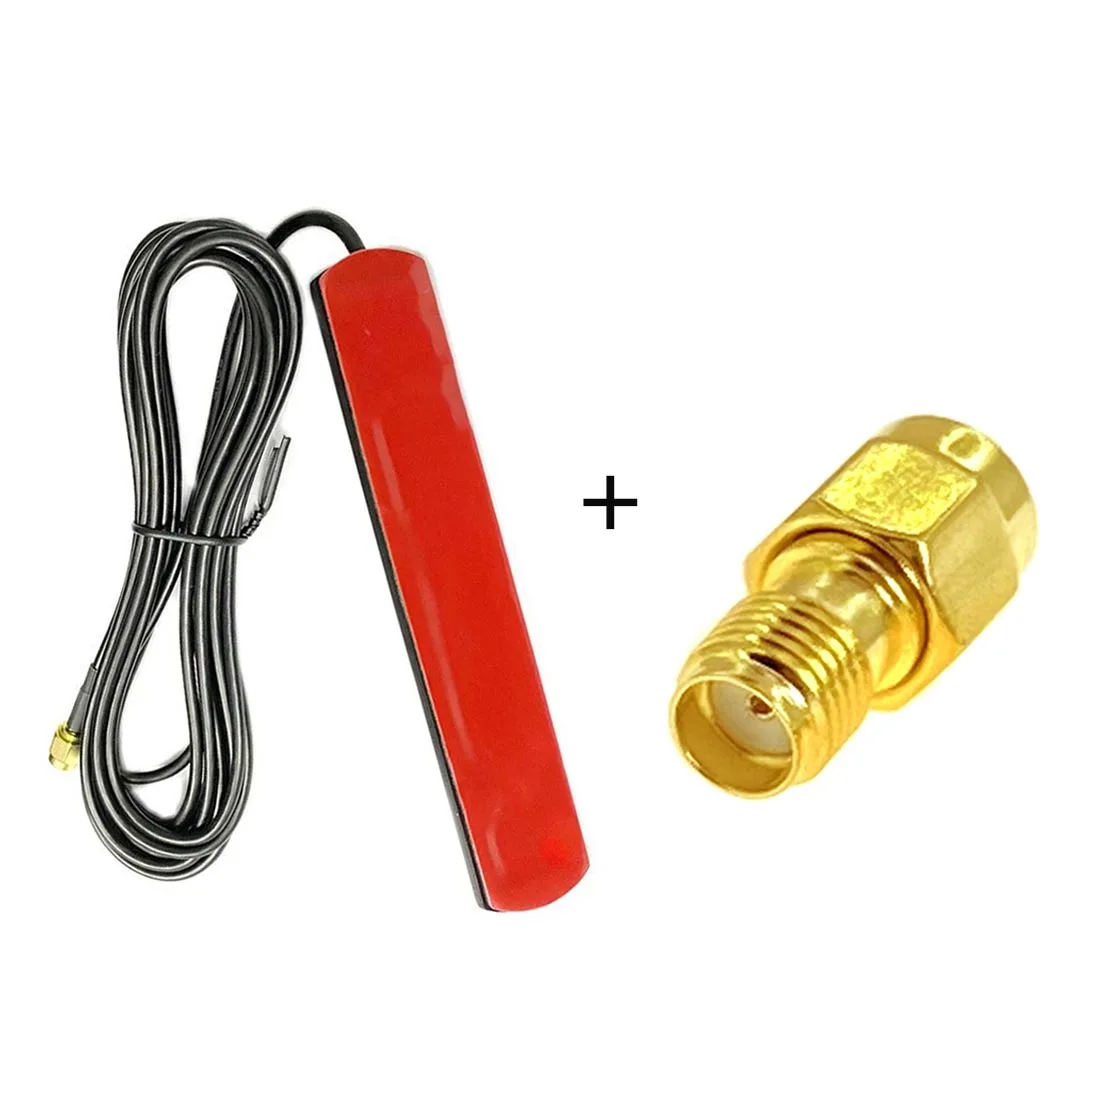 

433Mhz Patch Antenna 2.15dbi RG174 Cable 3m SMA Male Connector + Rp-Sma Plug Switch Sma Female Straight Adapter